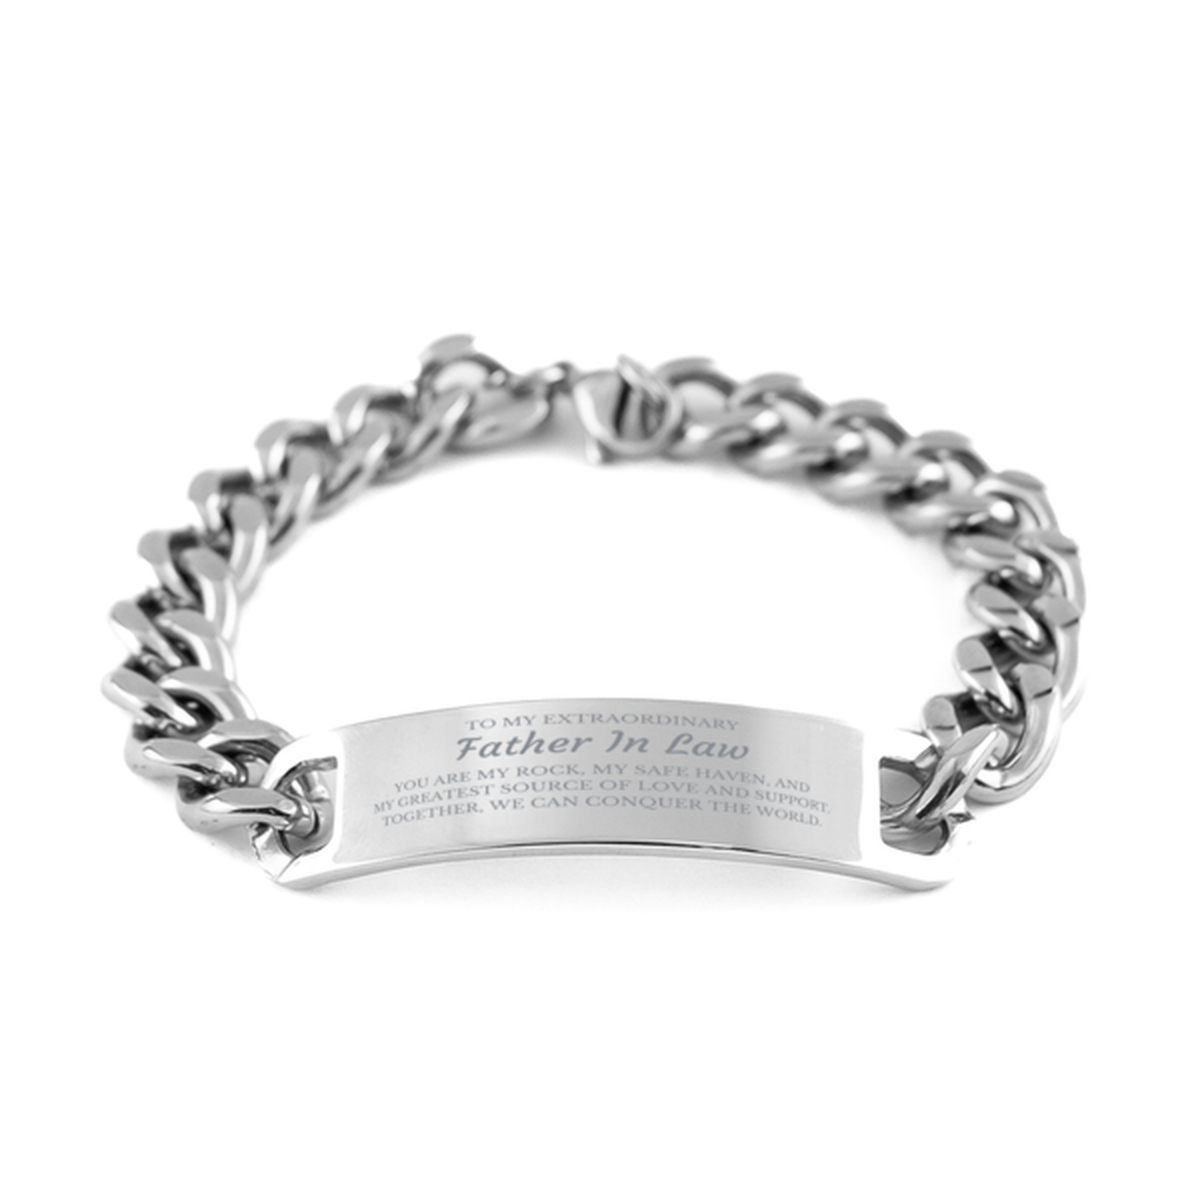 To My Extraordinary Father In Law Gifts, Together, we can conquer the world, Birthday Cuban Chain Stainless Steel Bracelet For Father In Law, Christmas Gifts For Father In Law